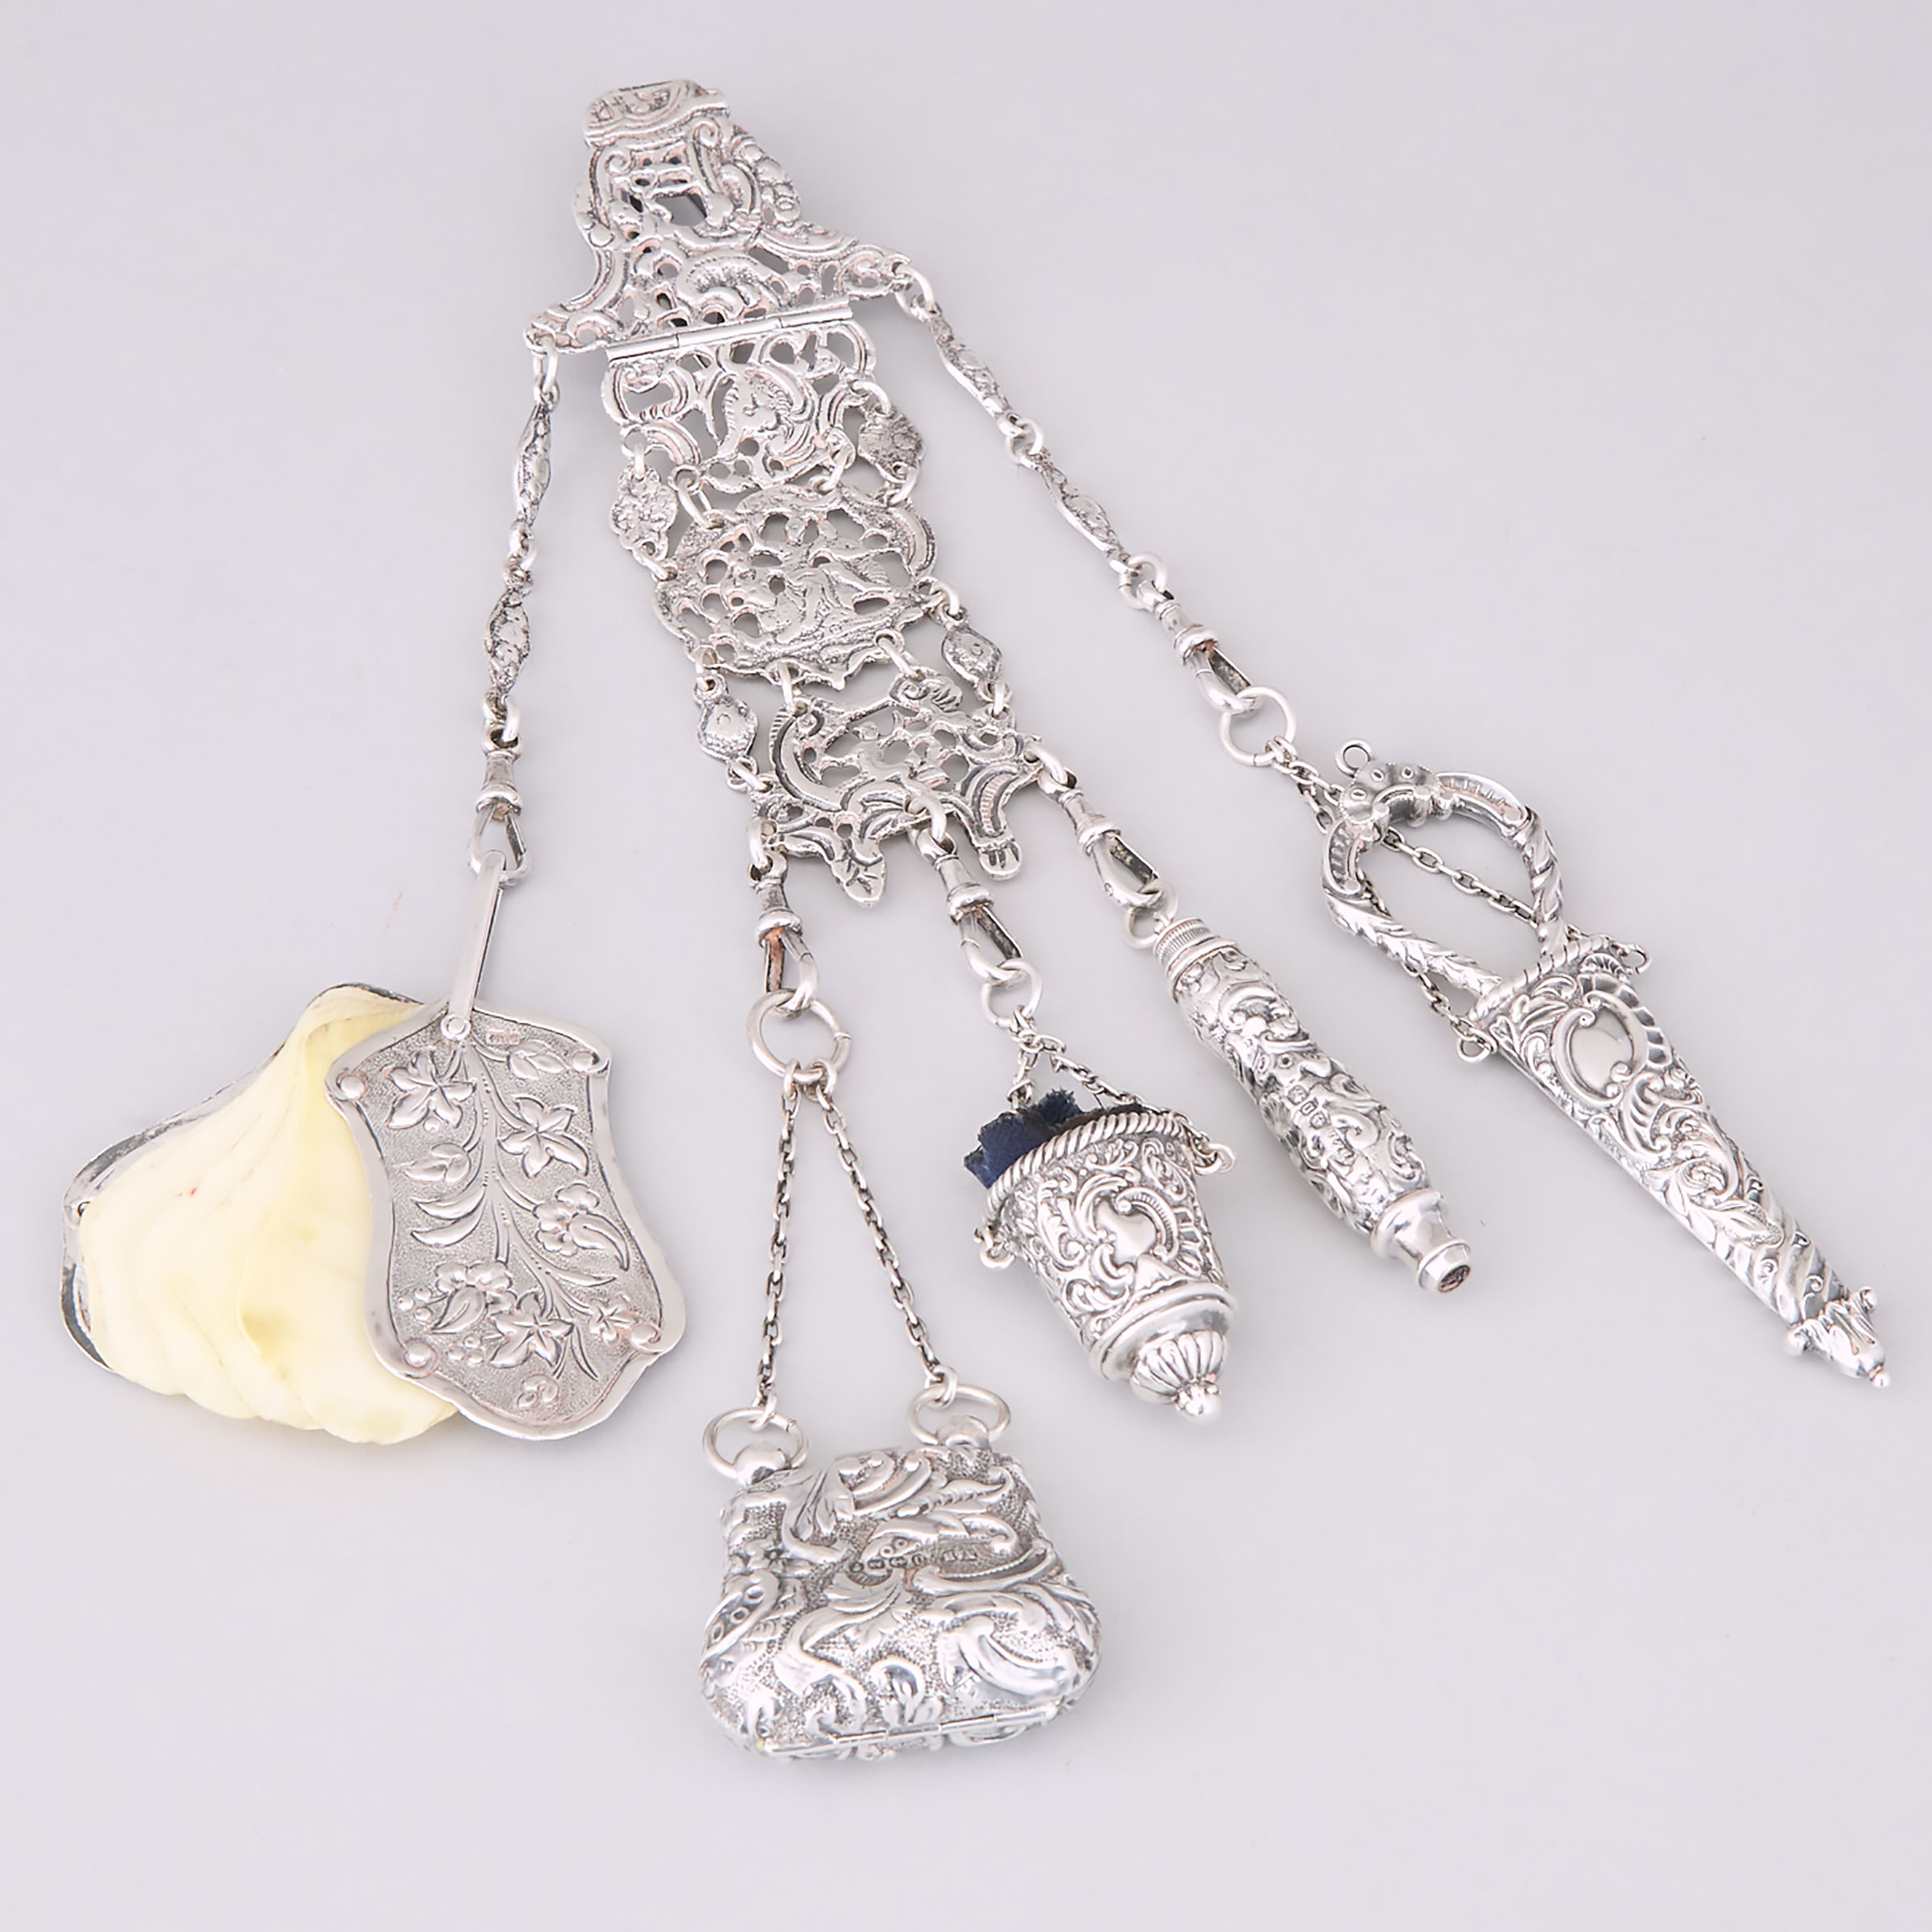 Victorian Silver Chatelaine, late 19th century